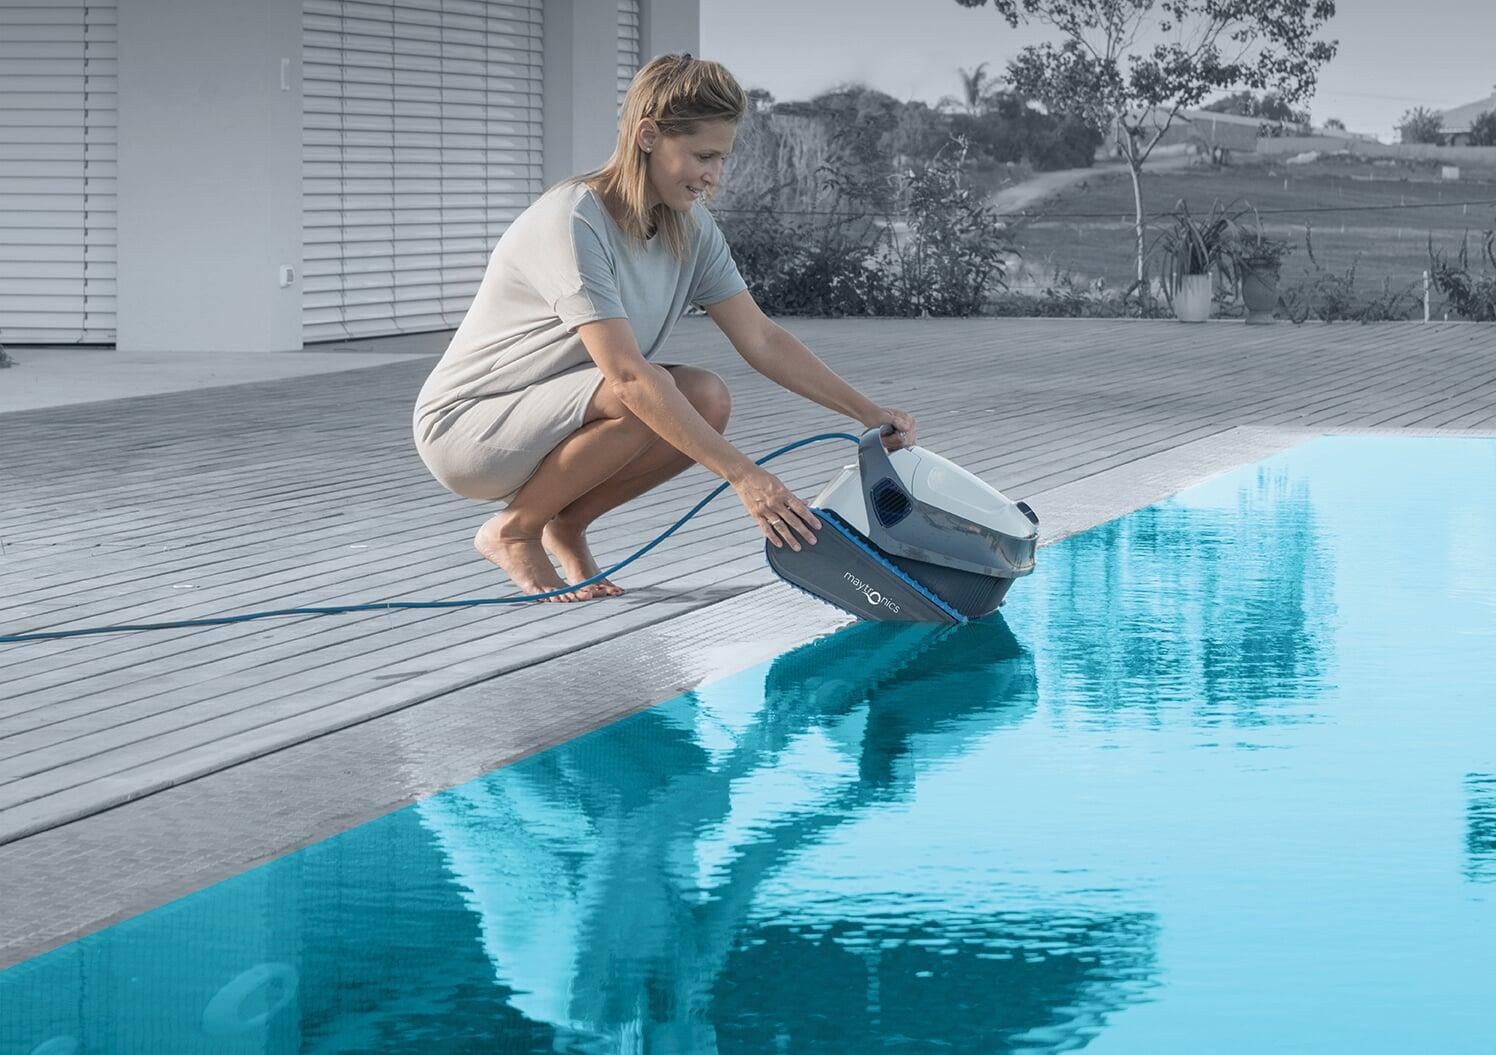 Automatic Pool Cleaning Robots, Buy Robotic Pool Cleaners